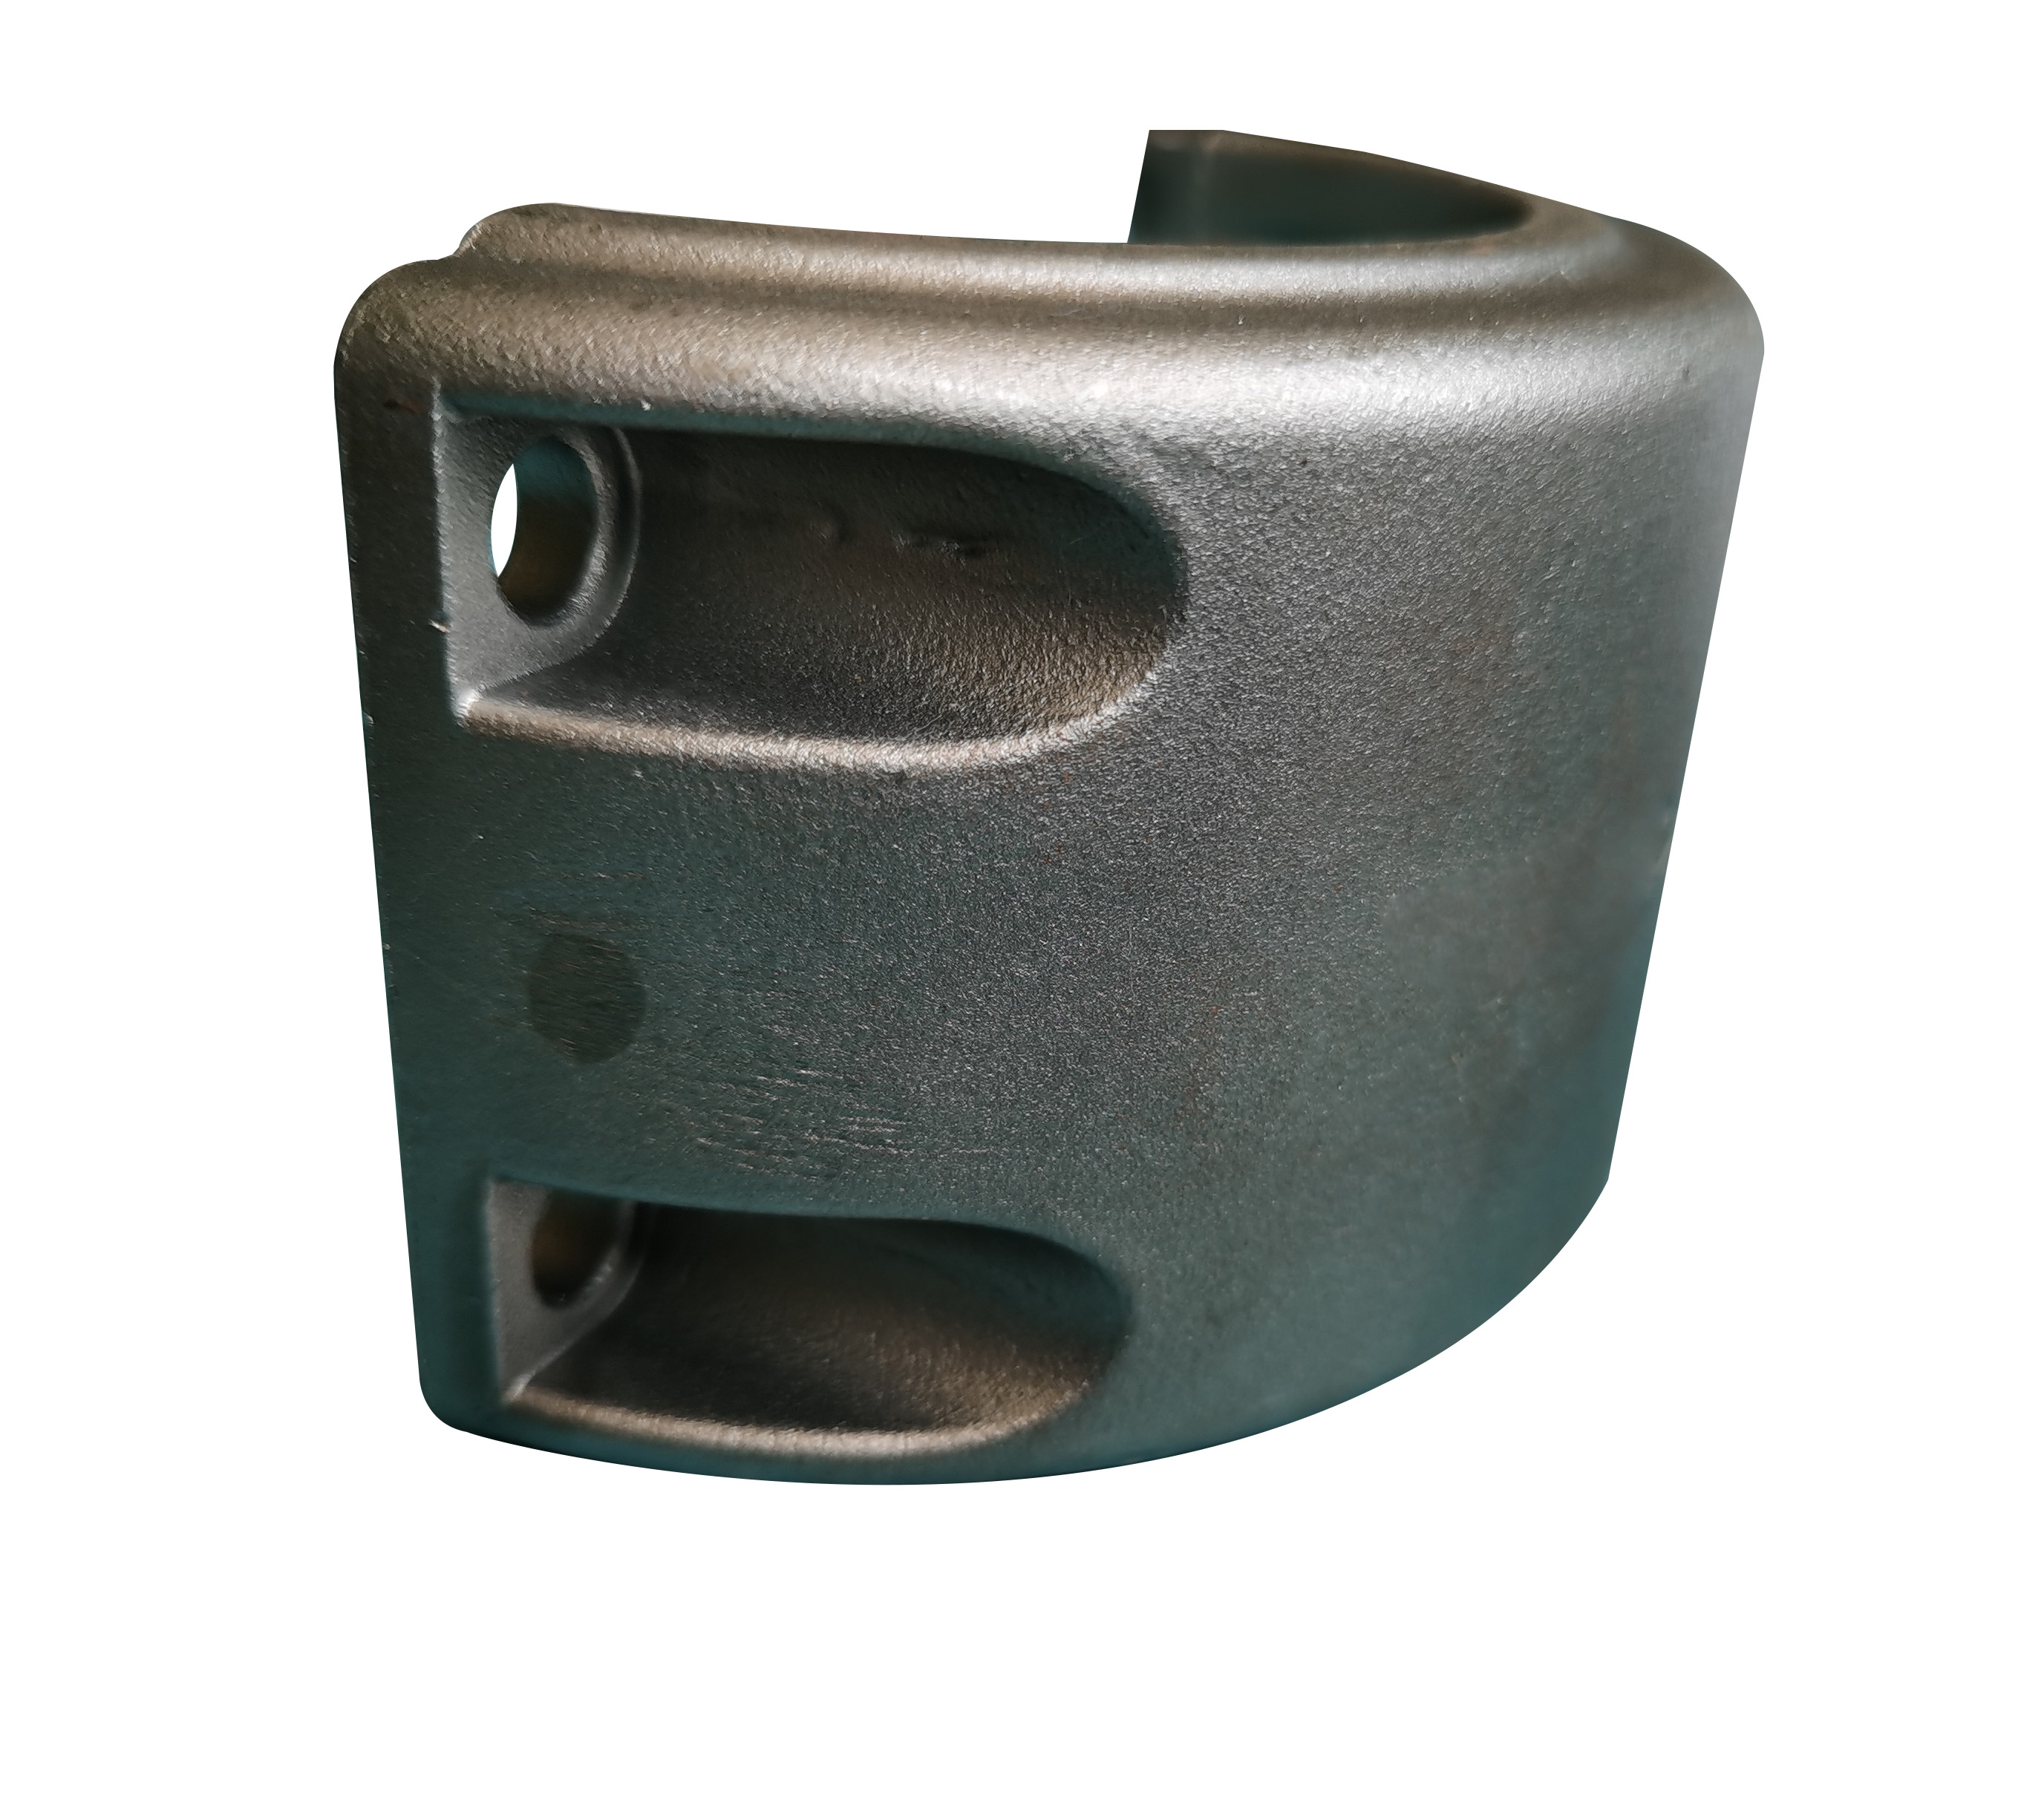 Stainless steel mechanical fastener casting part